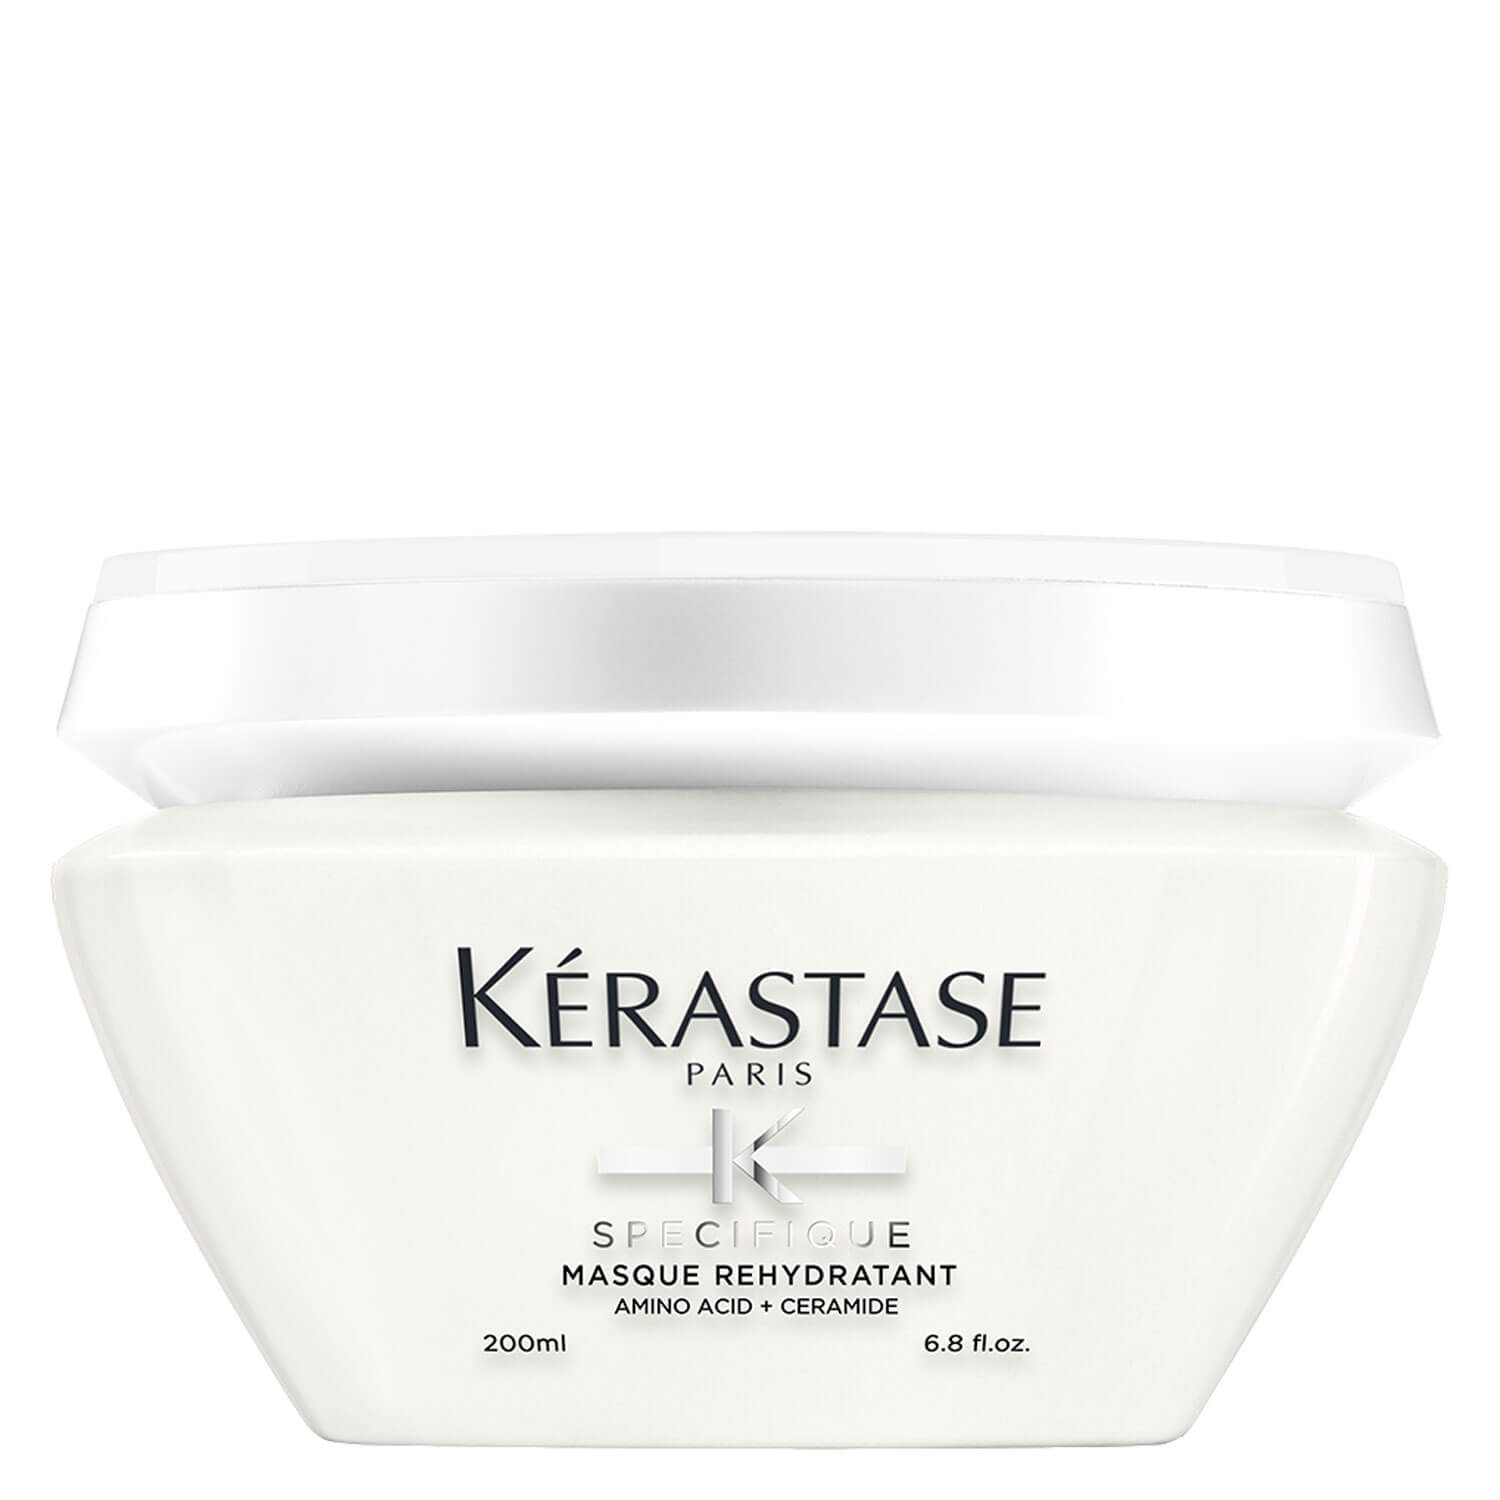 Product image from Spécifique - Masque Rehydratant